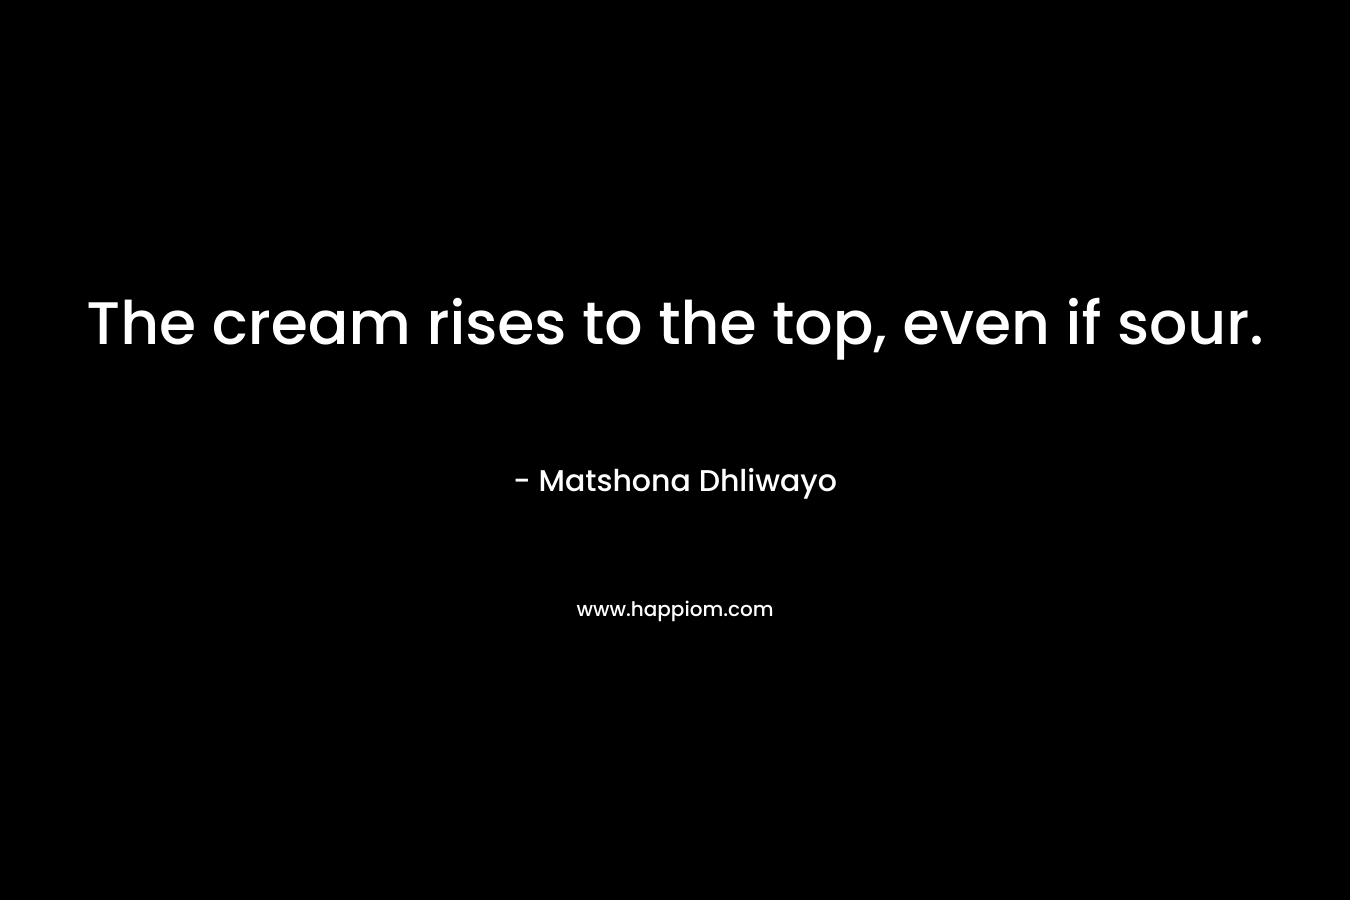 The cream rises to the top, even if sour. – Matshona Dhliwayo